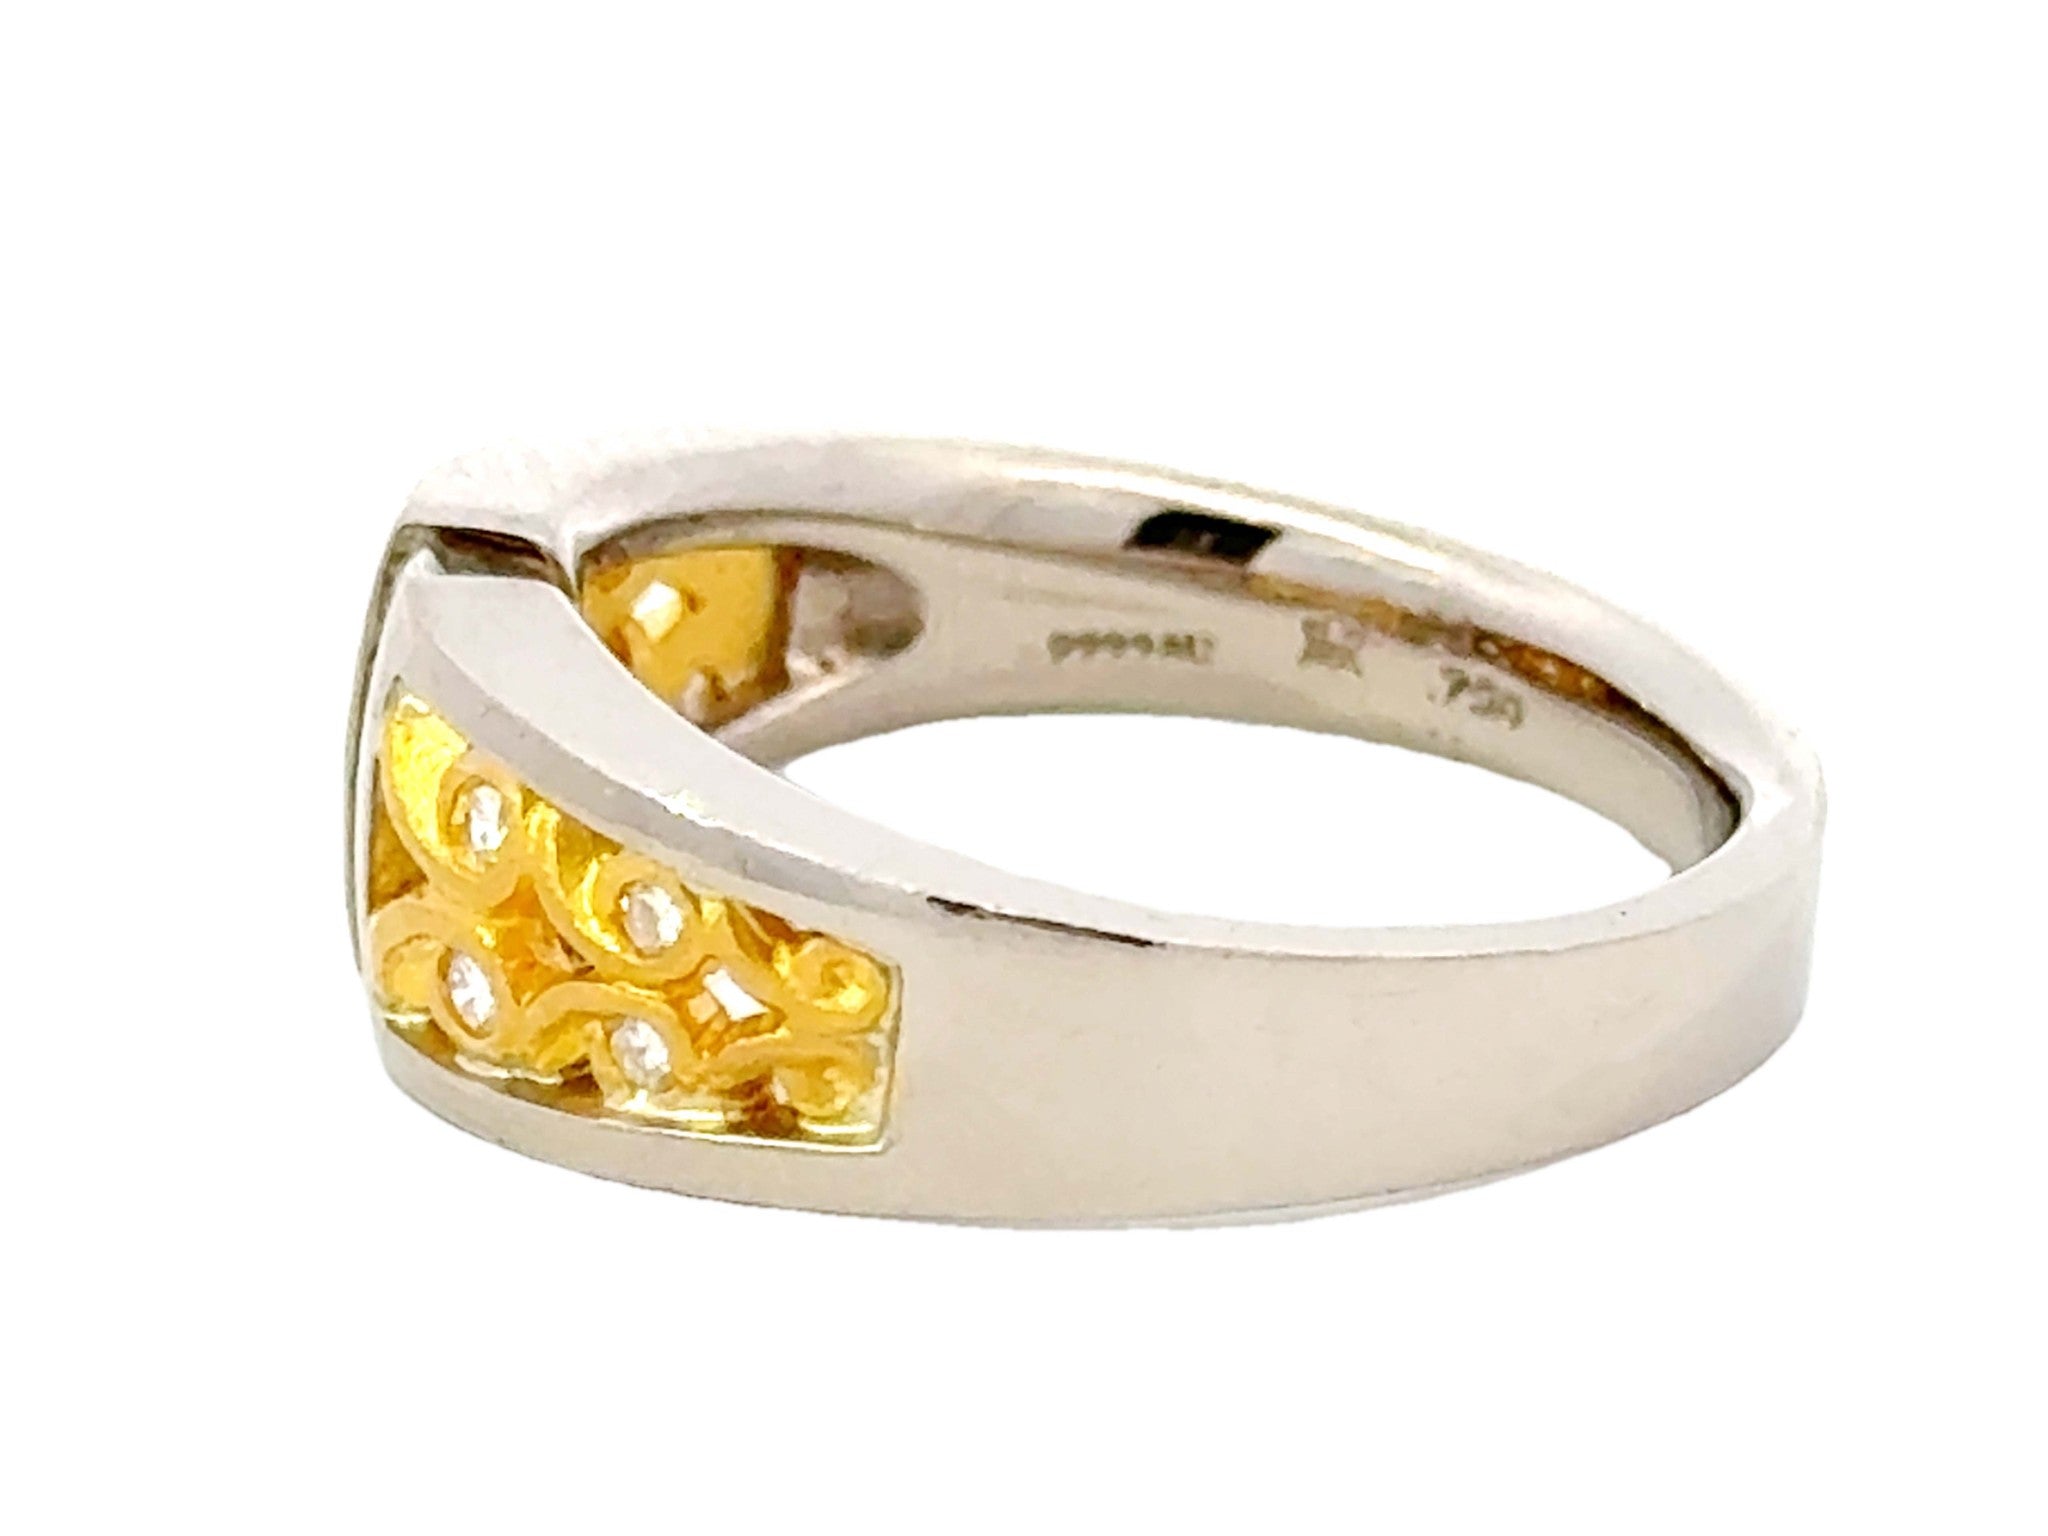 Brilliant Cut Vertical Diamond Row Ring 18K and 24K Yellow and White Gold